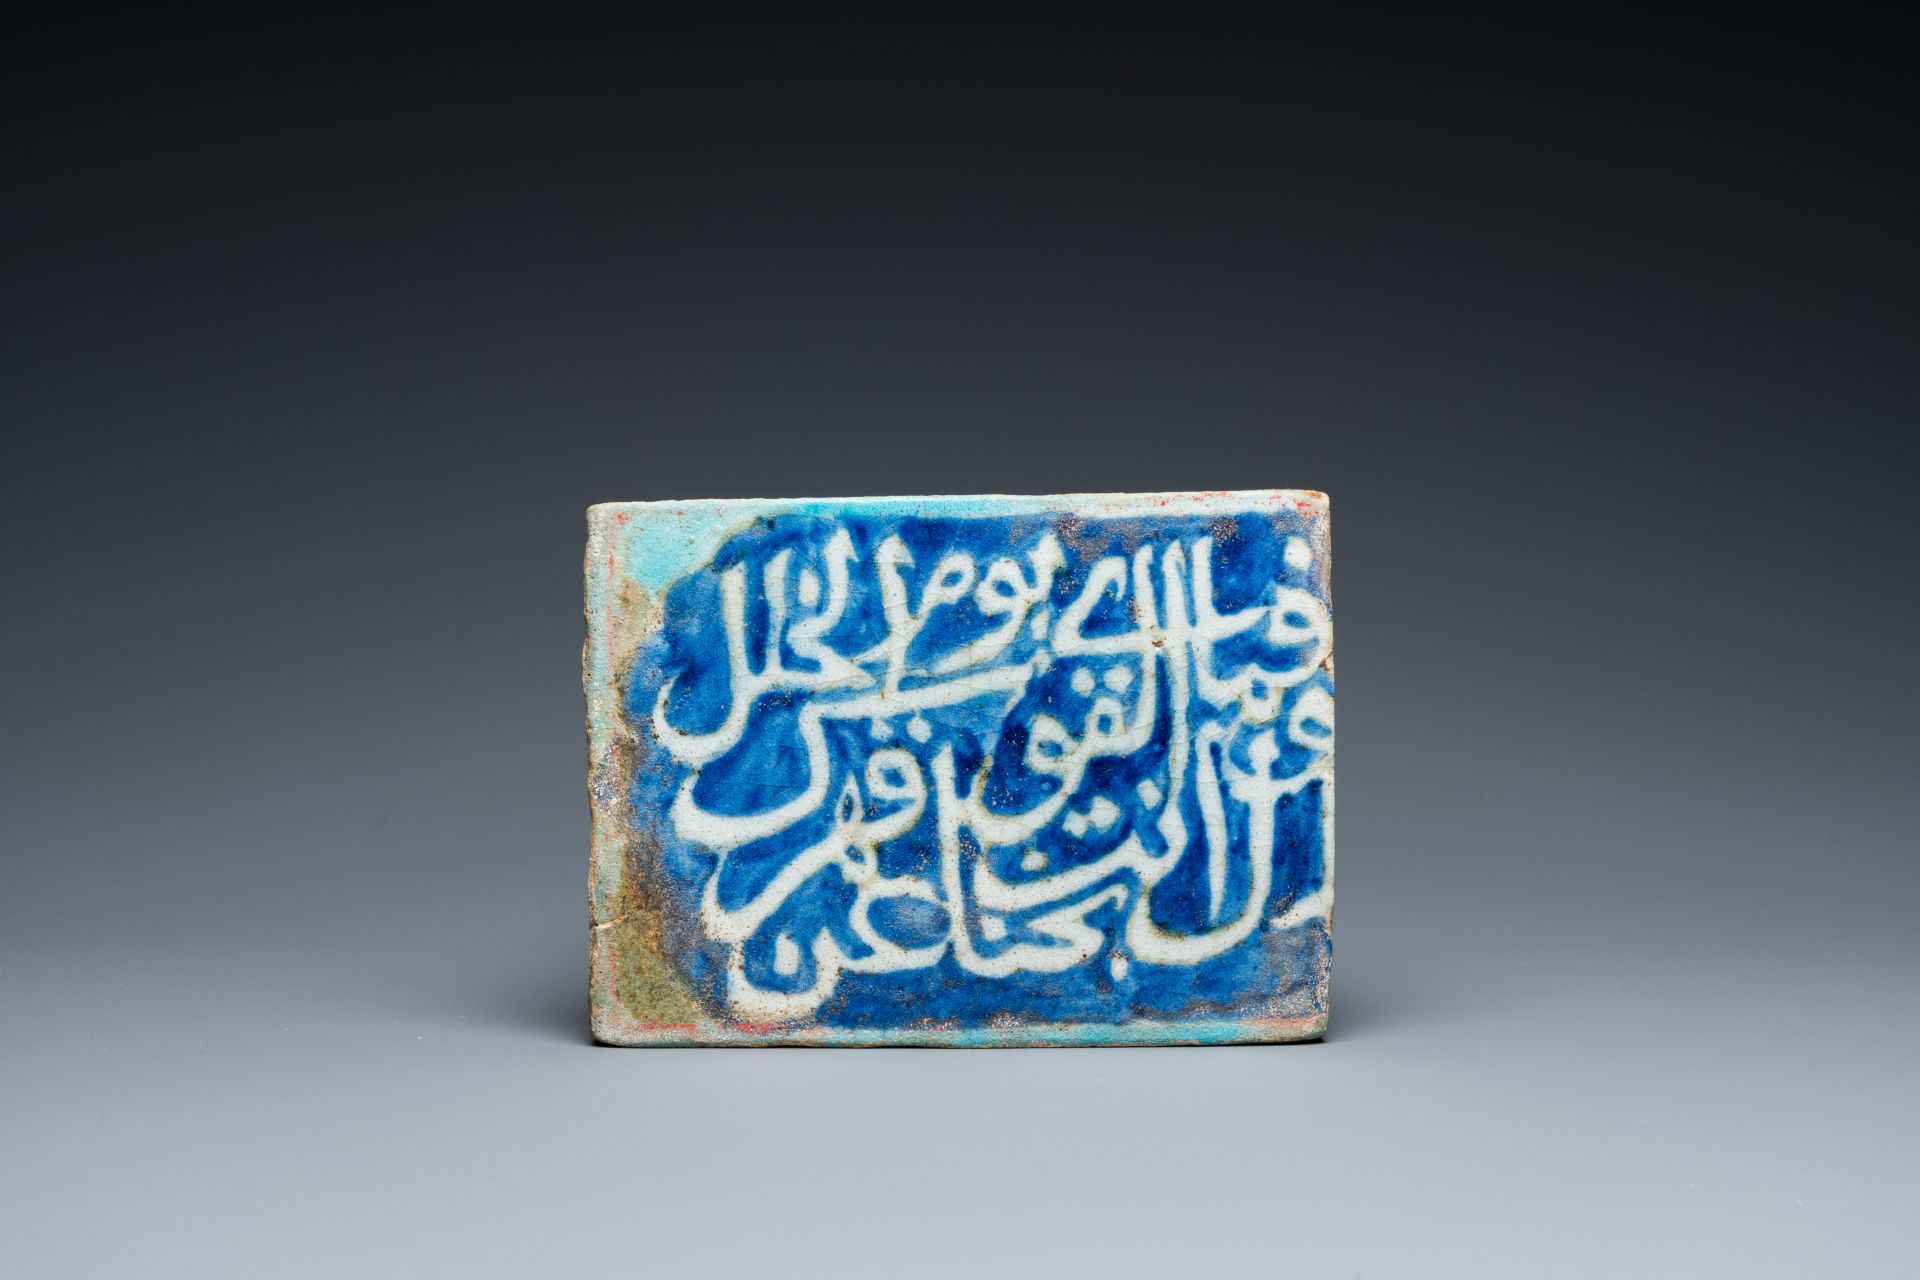 An Islamic calligraphic tile in blue, turquoise and white, 17th C.